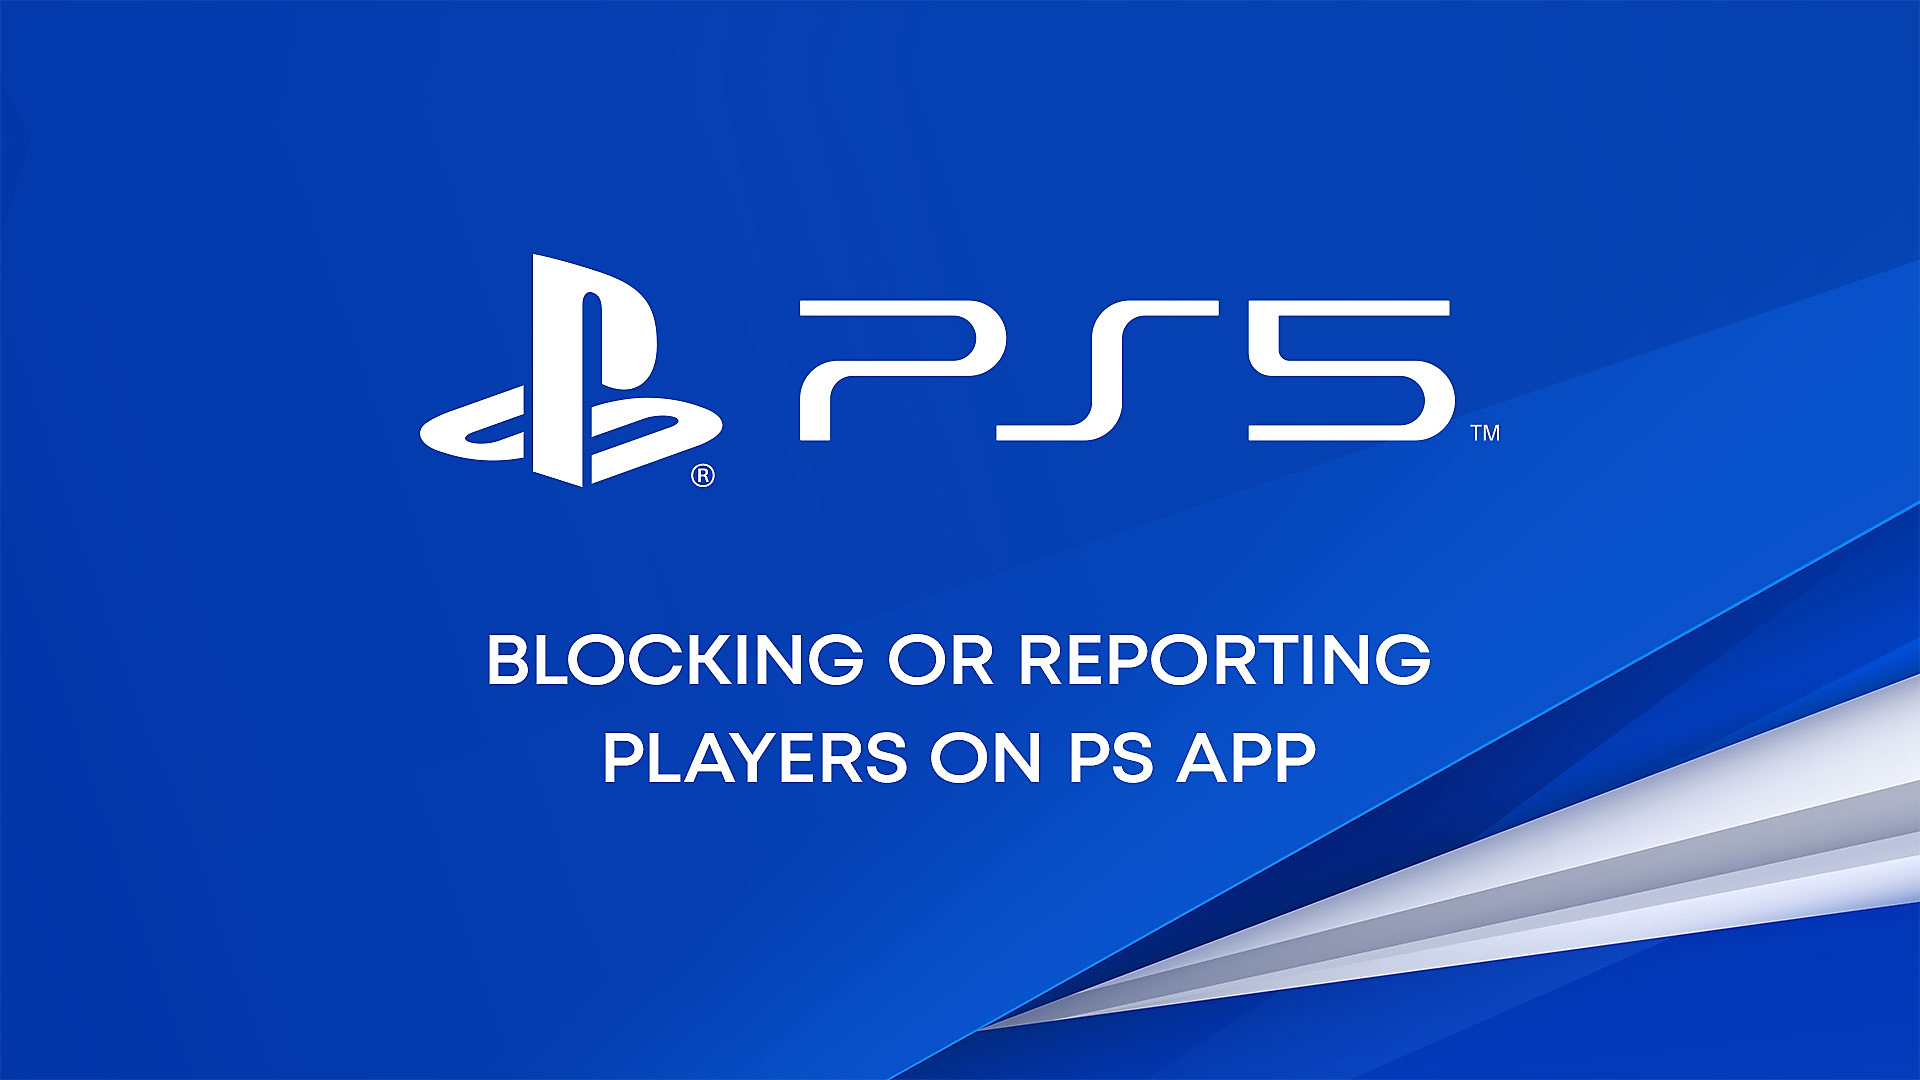 Youtube video regarding blocking or reporting players on PS App